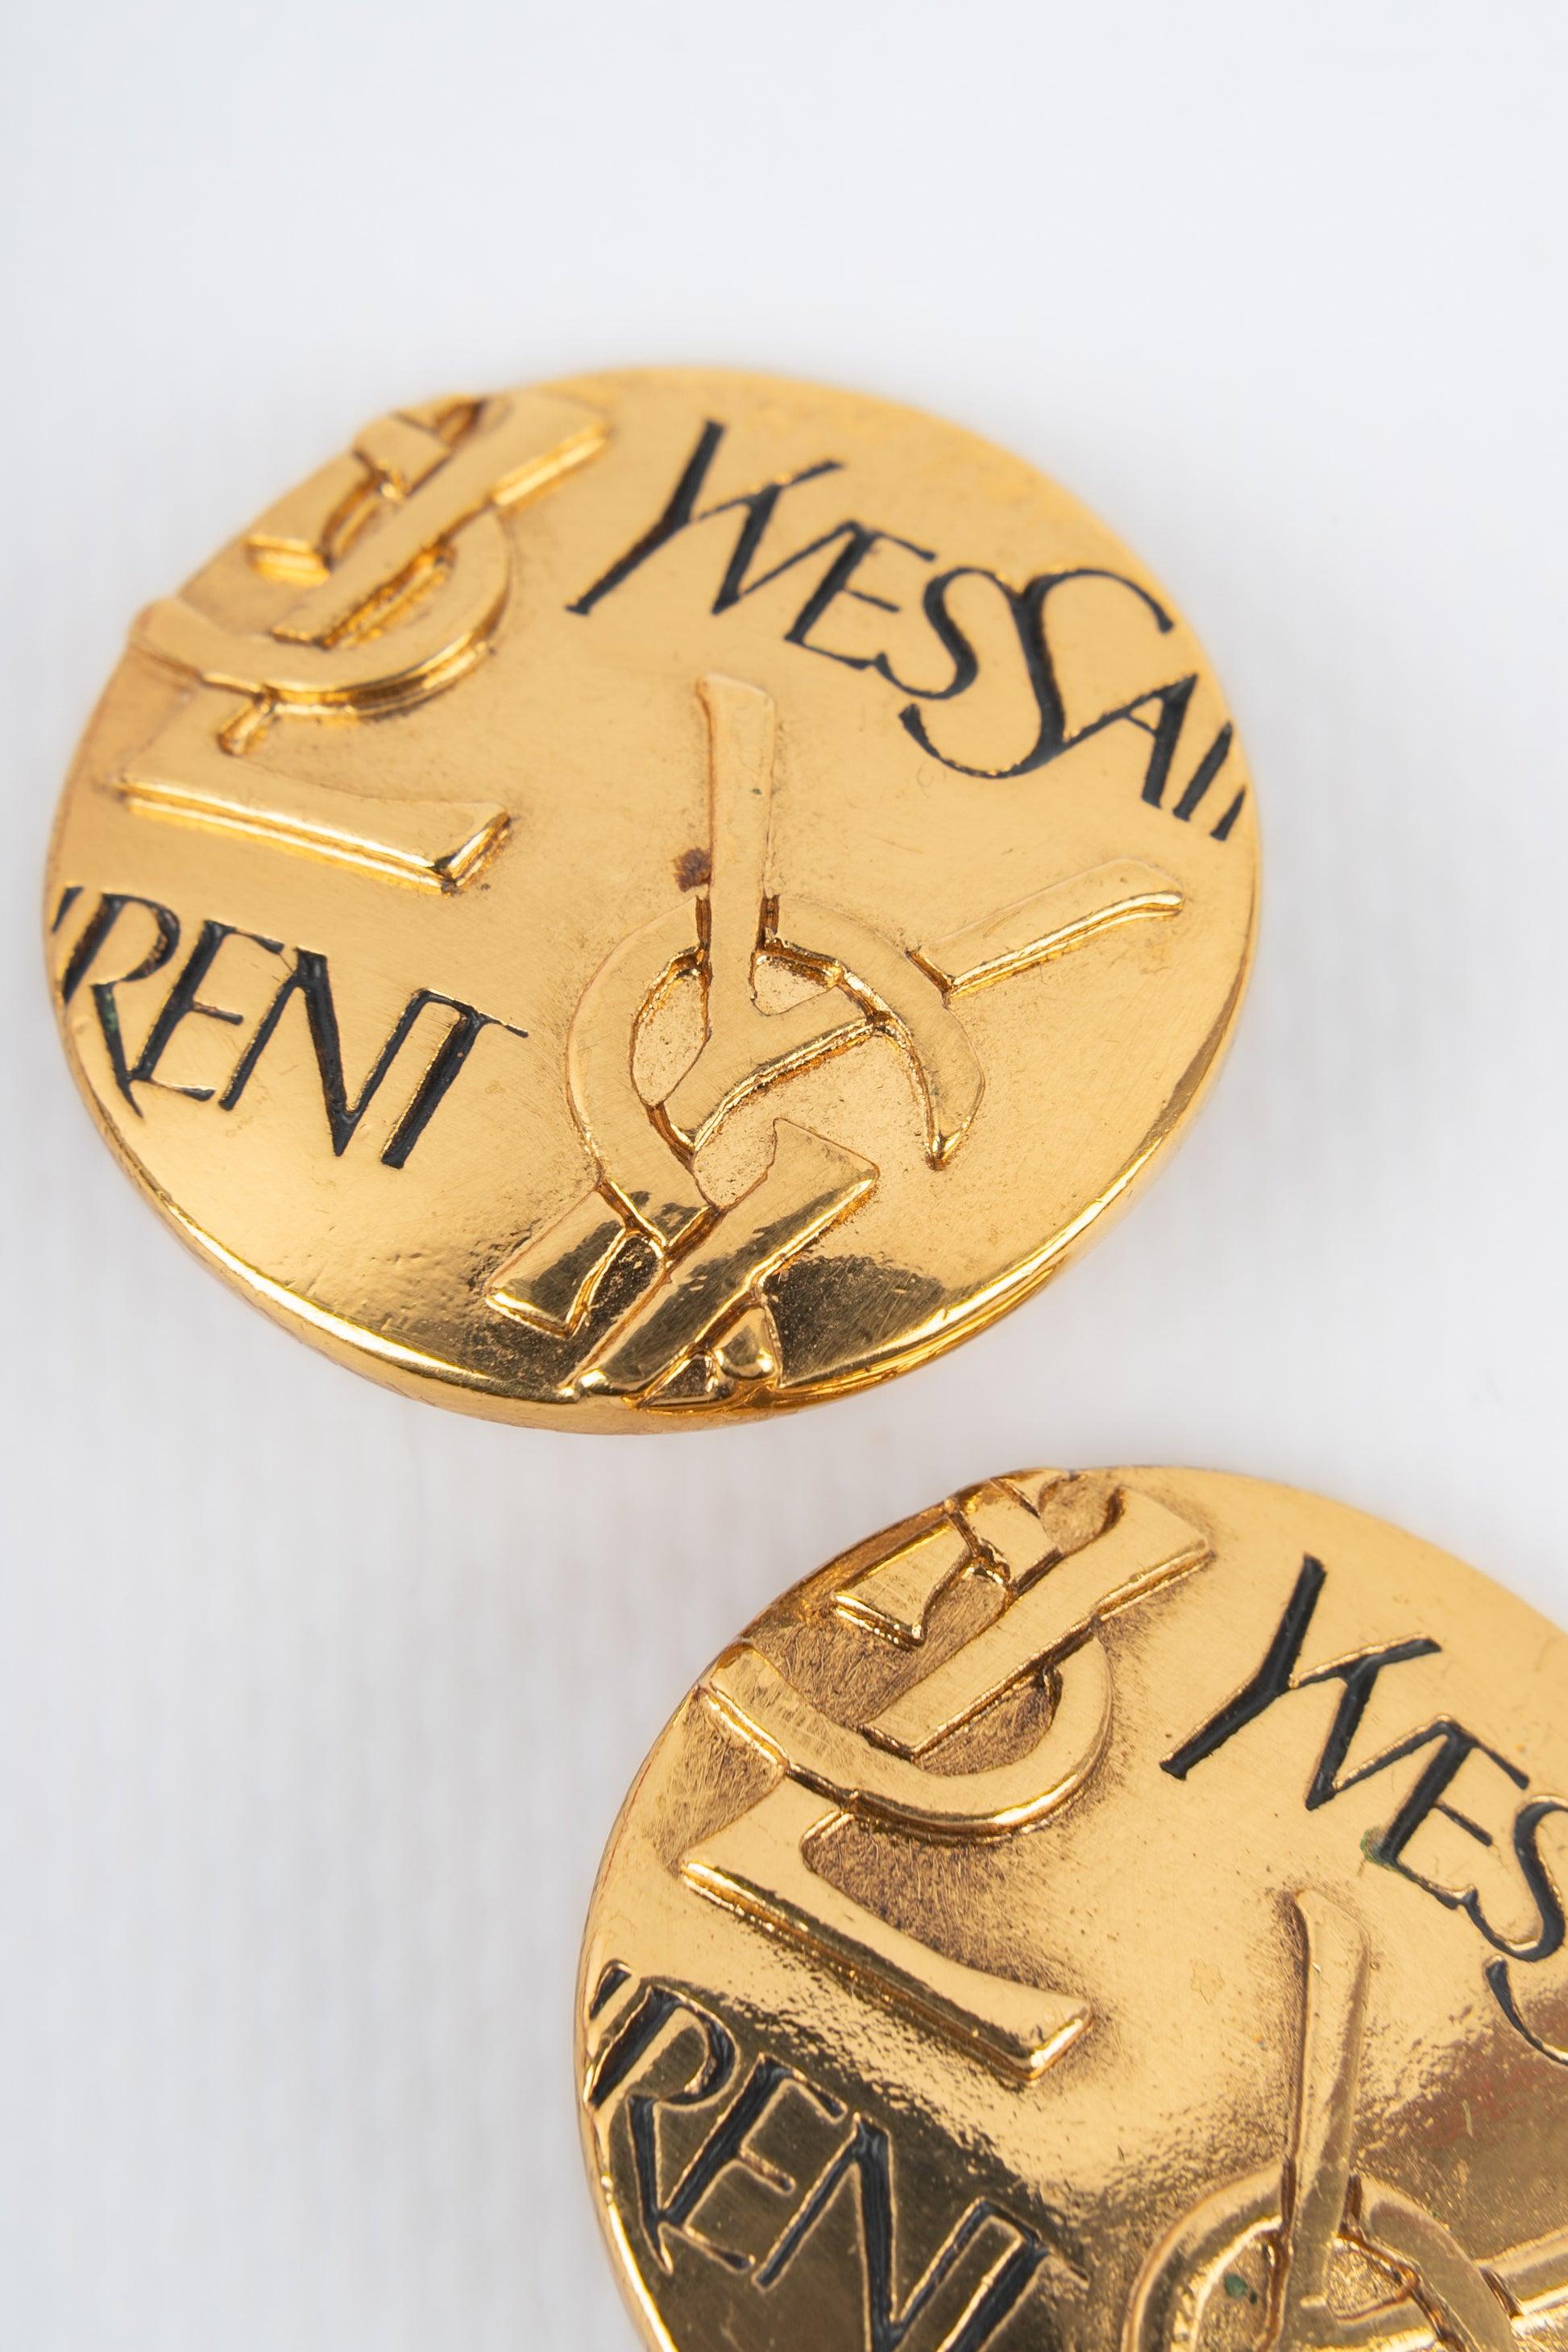 Yves Saint Laurent - (Made in France) Golden metal clip-on earrings from the beginning of the 1990s.

Additional information:
Condition: Very good condition
Dimensions: Diameter: 3 cm
Period: 20th Century

Seller Reference: BO286
